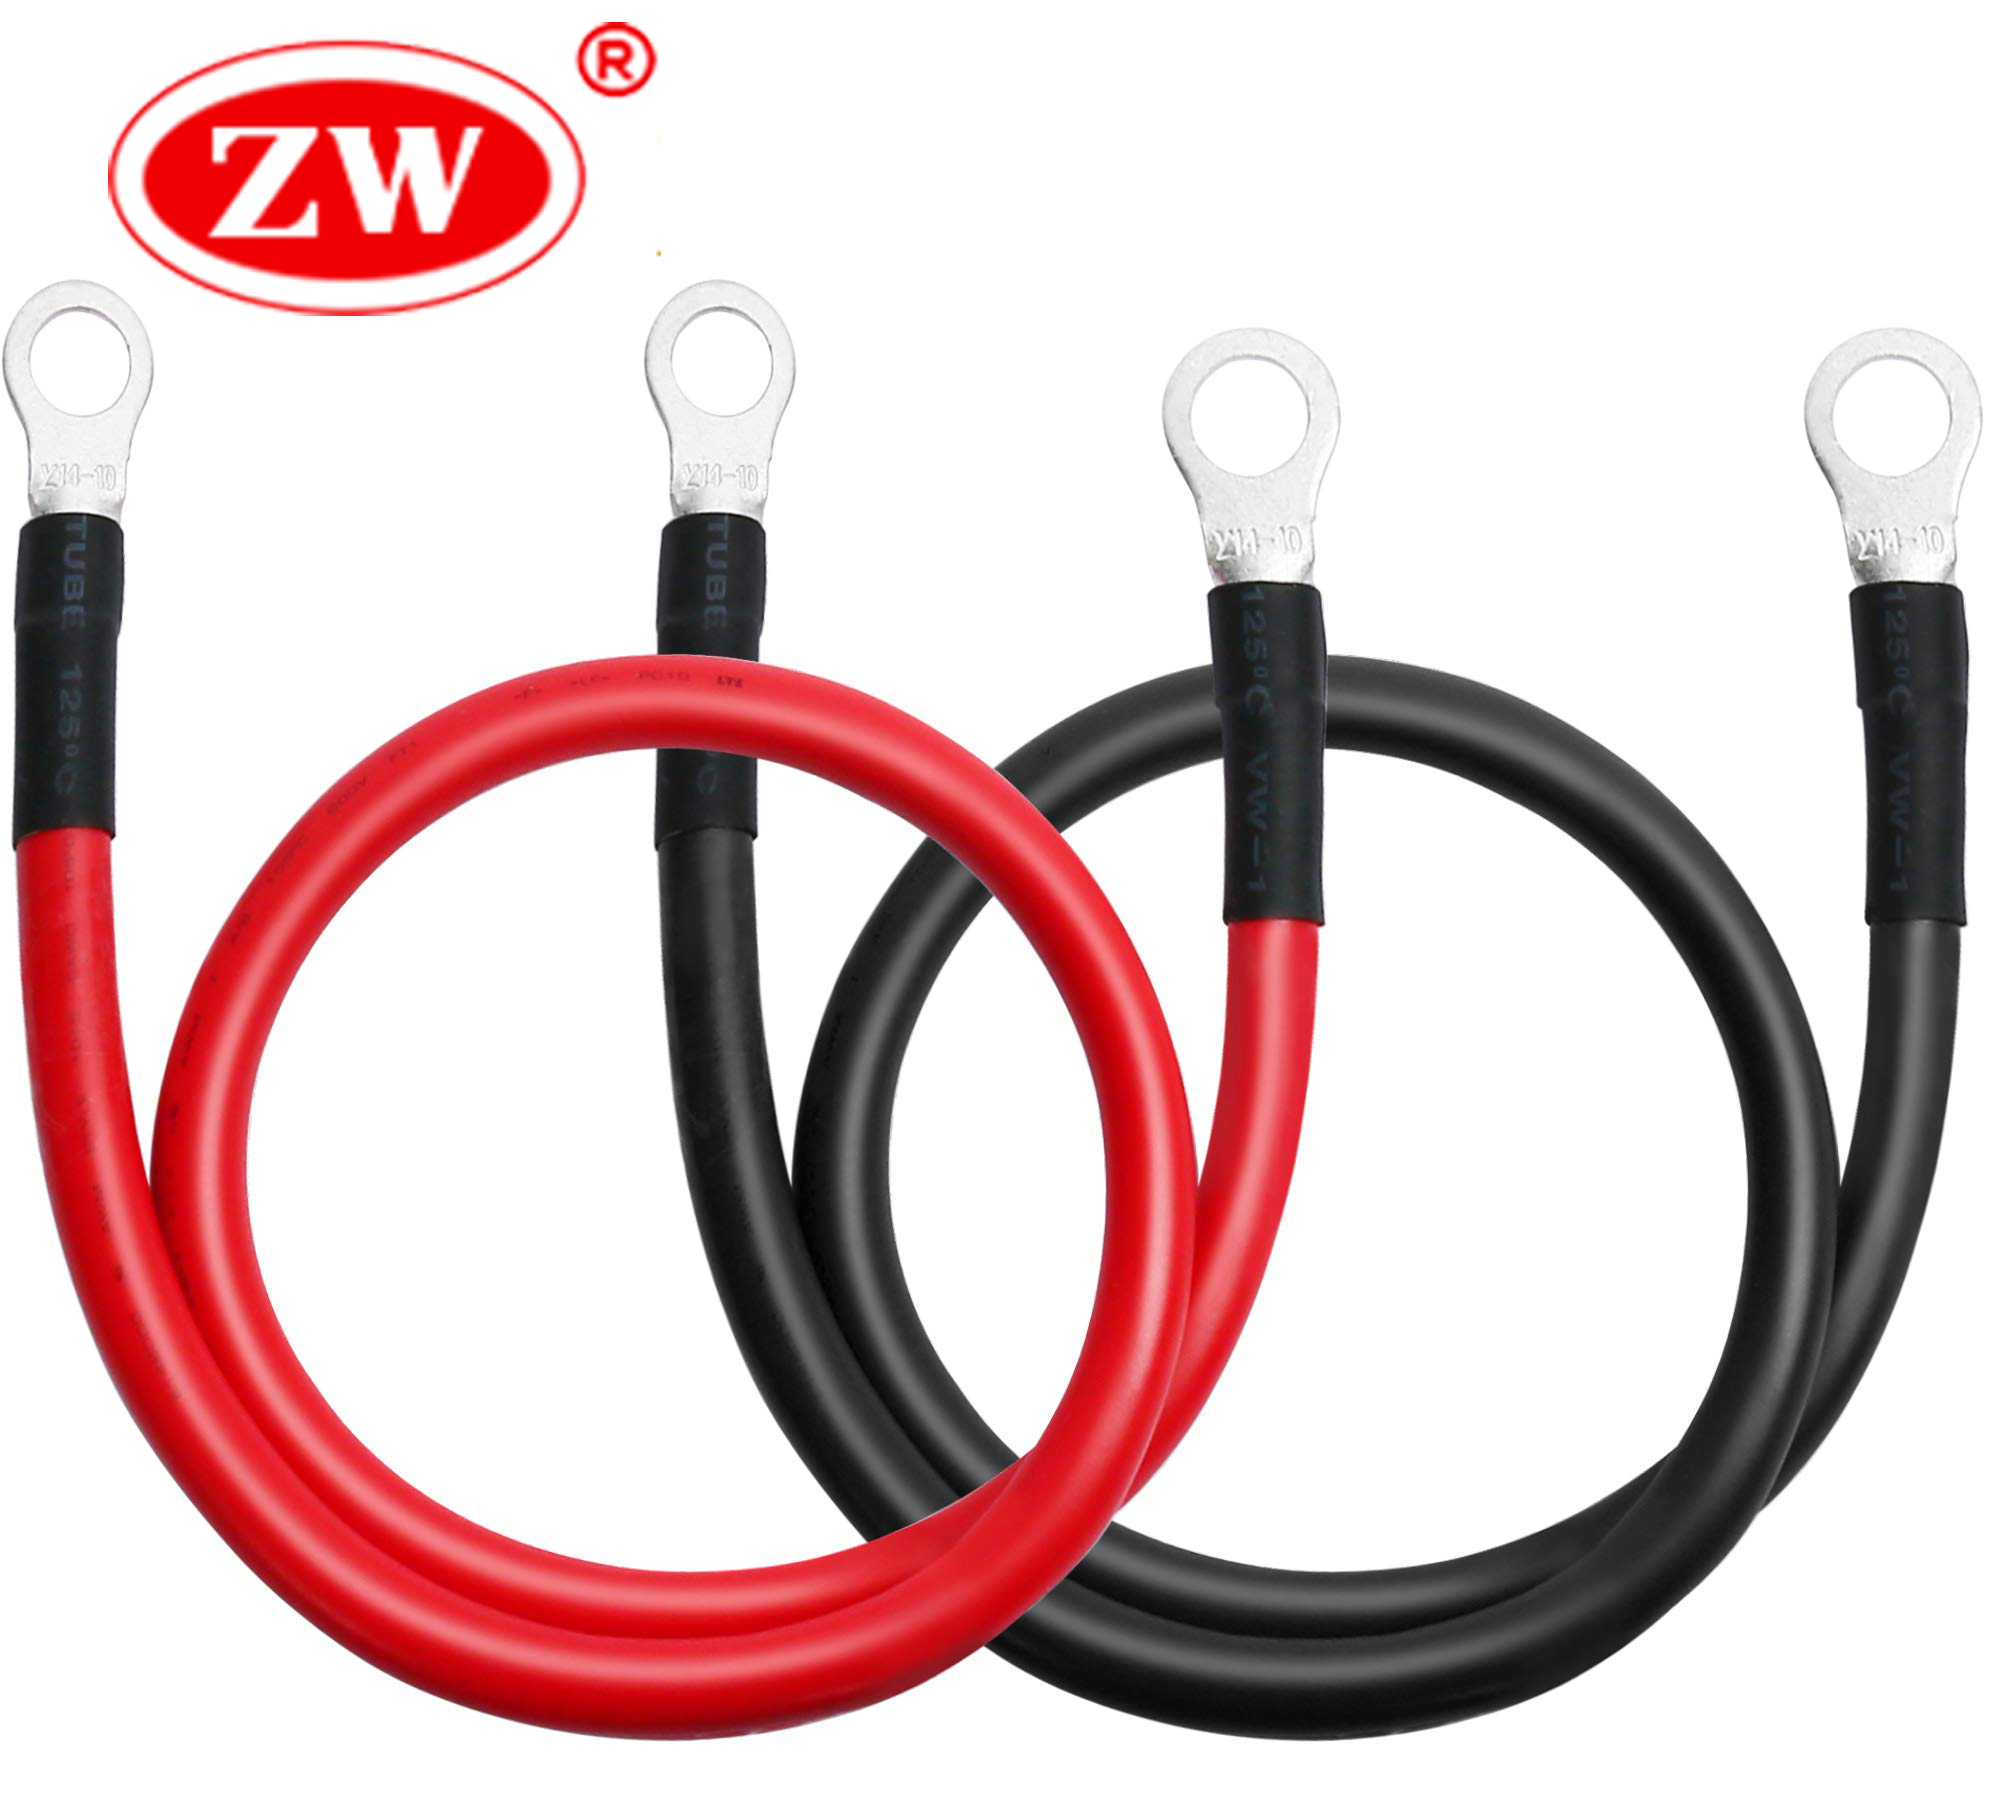 10mm battery cables